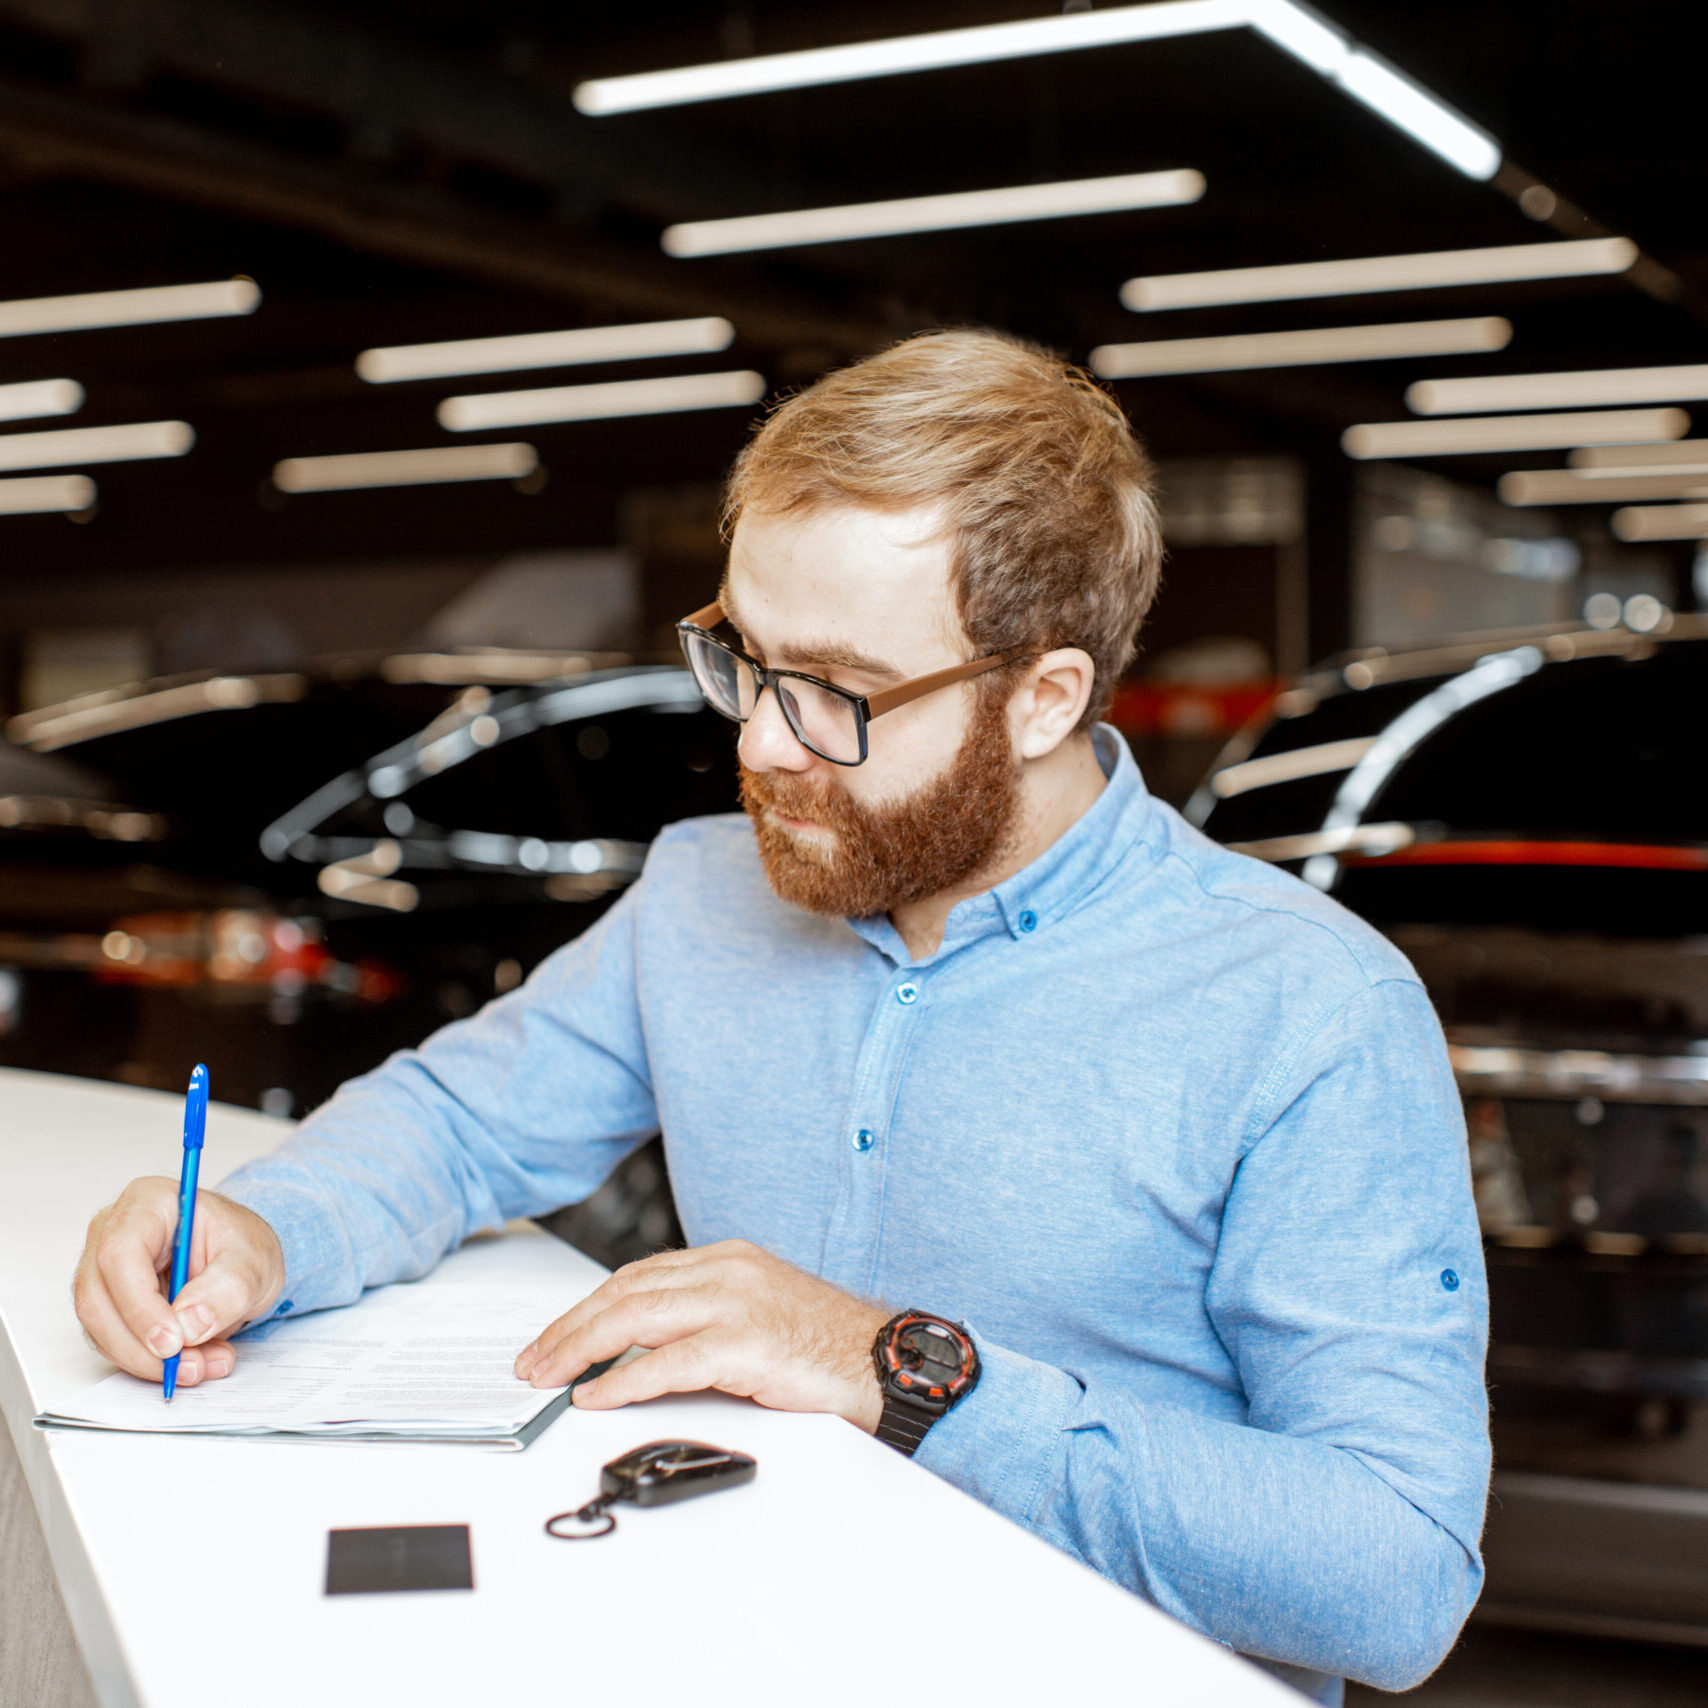 Man Signing Auto lease